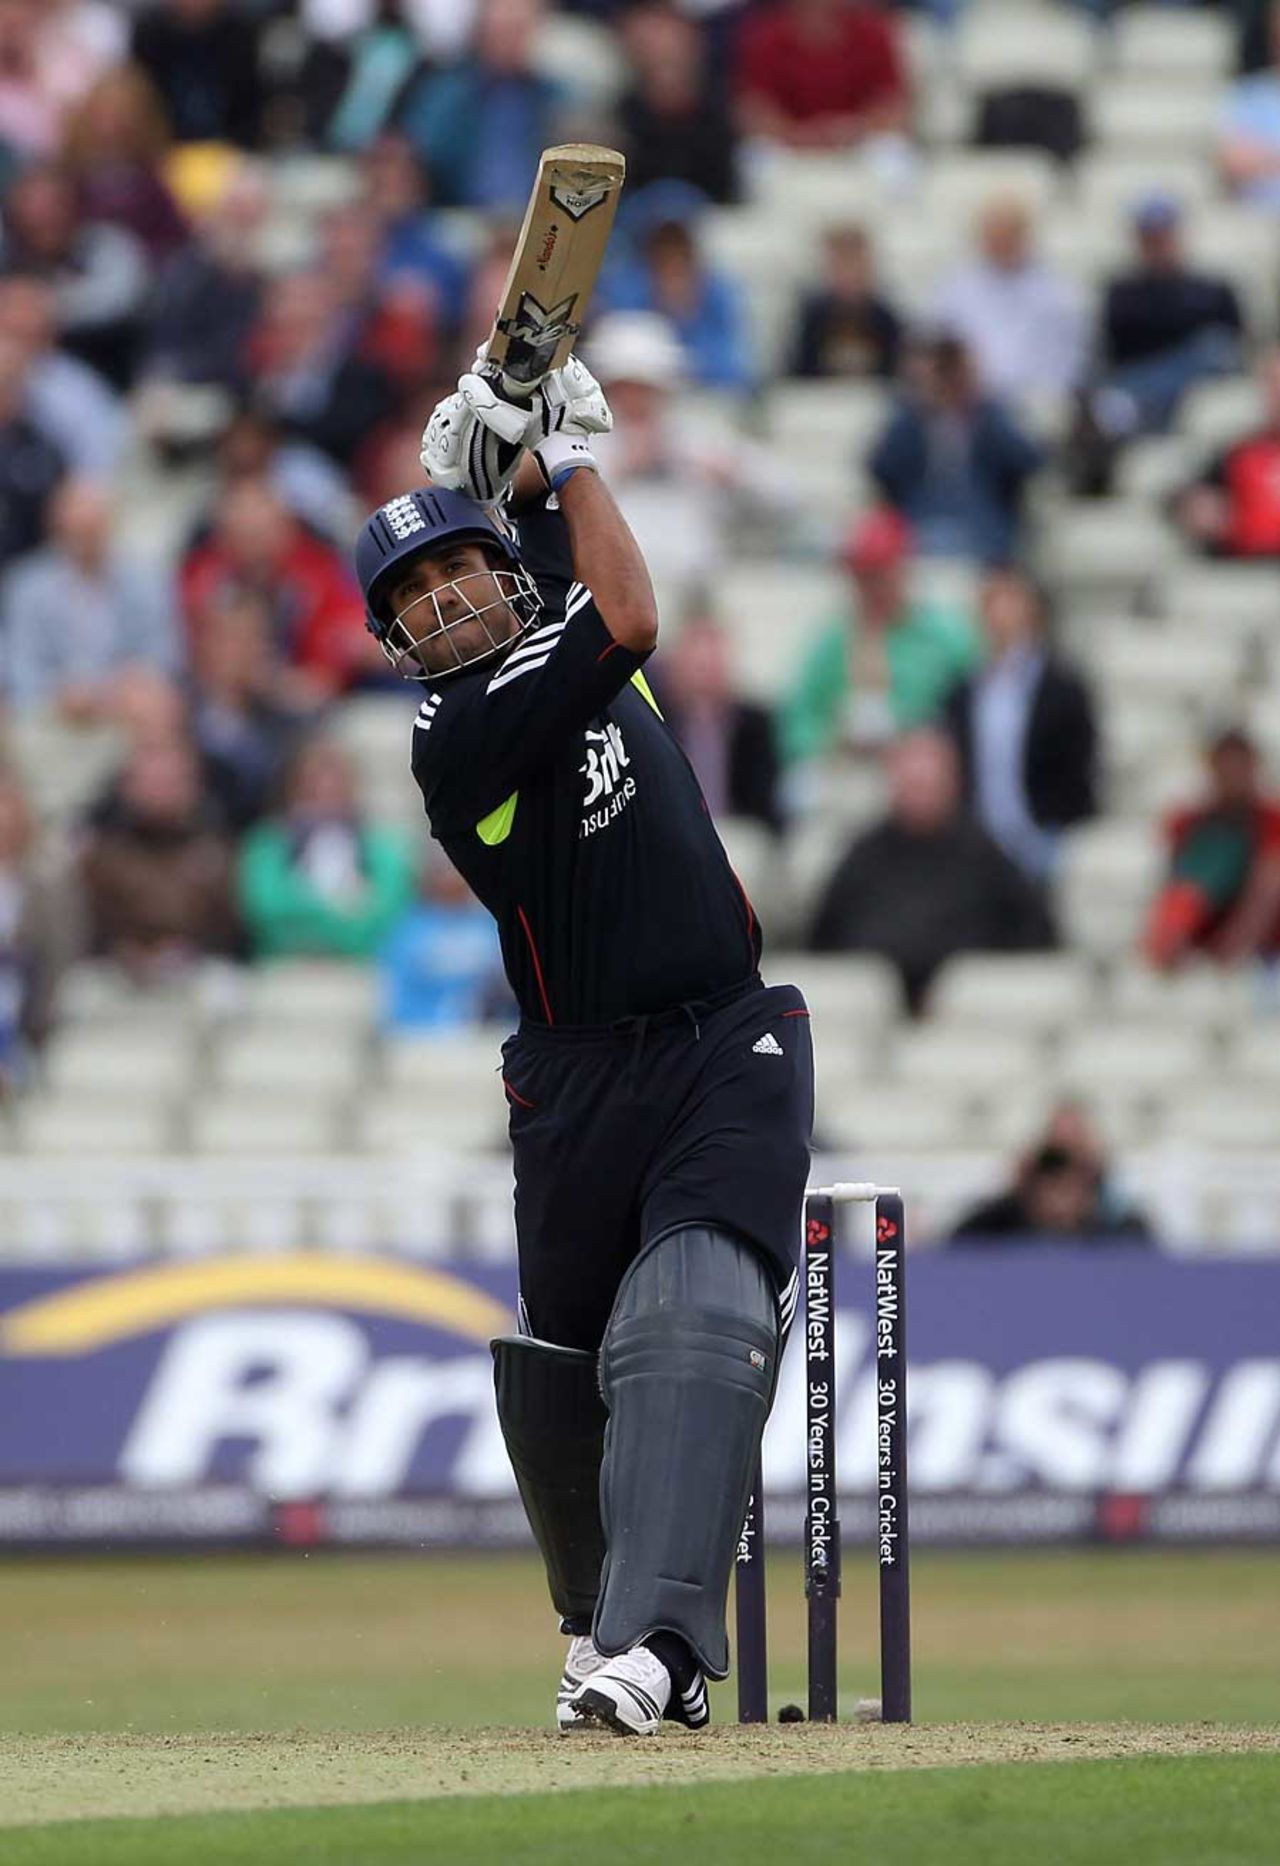 Ravi Bopara finished the innings in style with 45 off 16 balls, England v Bangladesh, 3rd ODI, Edgbaston, July 12, 2010